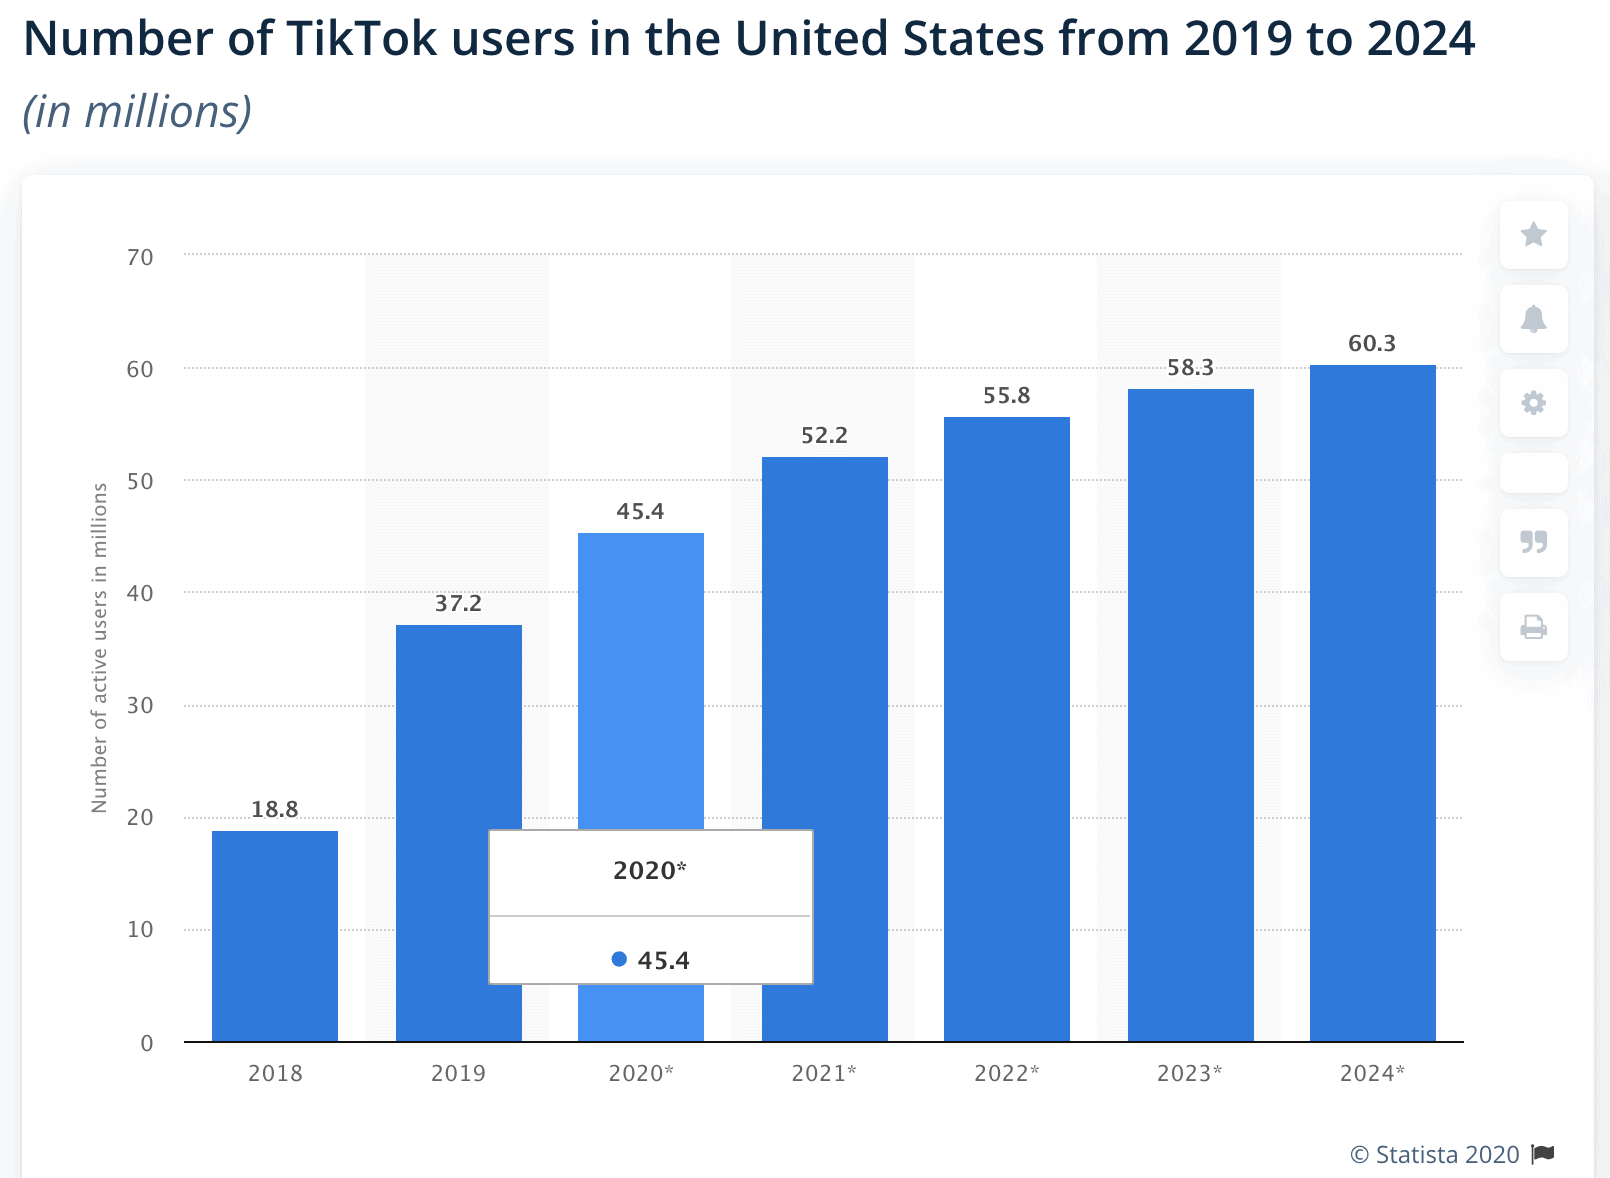 TikTok - Number of users in the United States 2019-2024